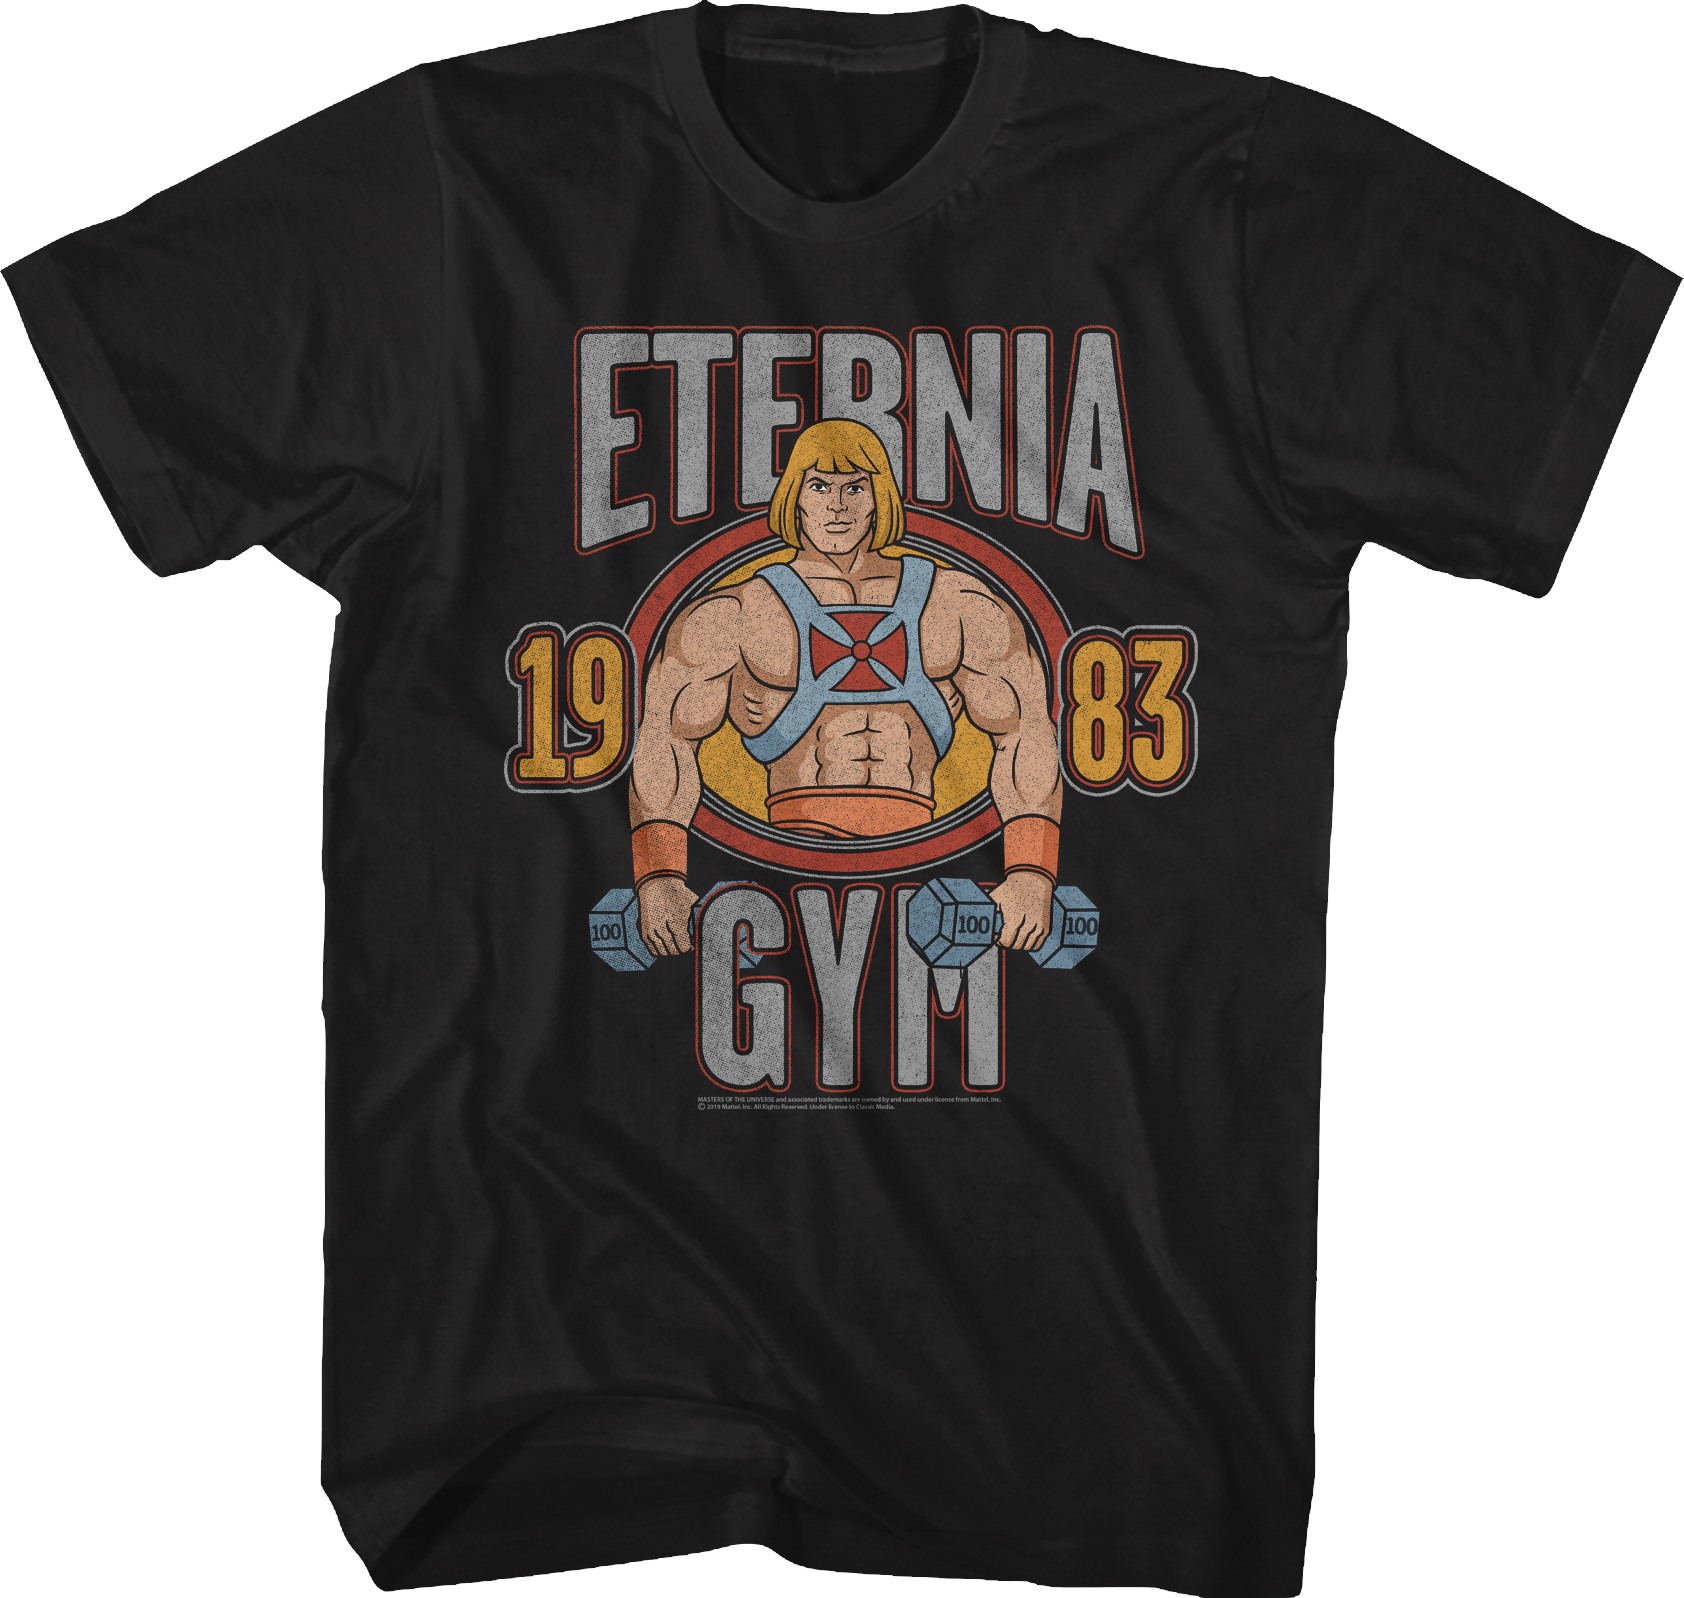 He-Man Eternia Gym Masters of the Universe T-Shirt